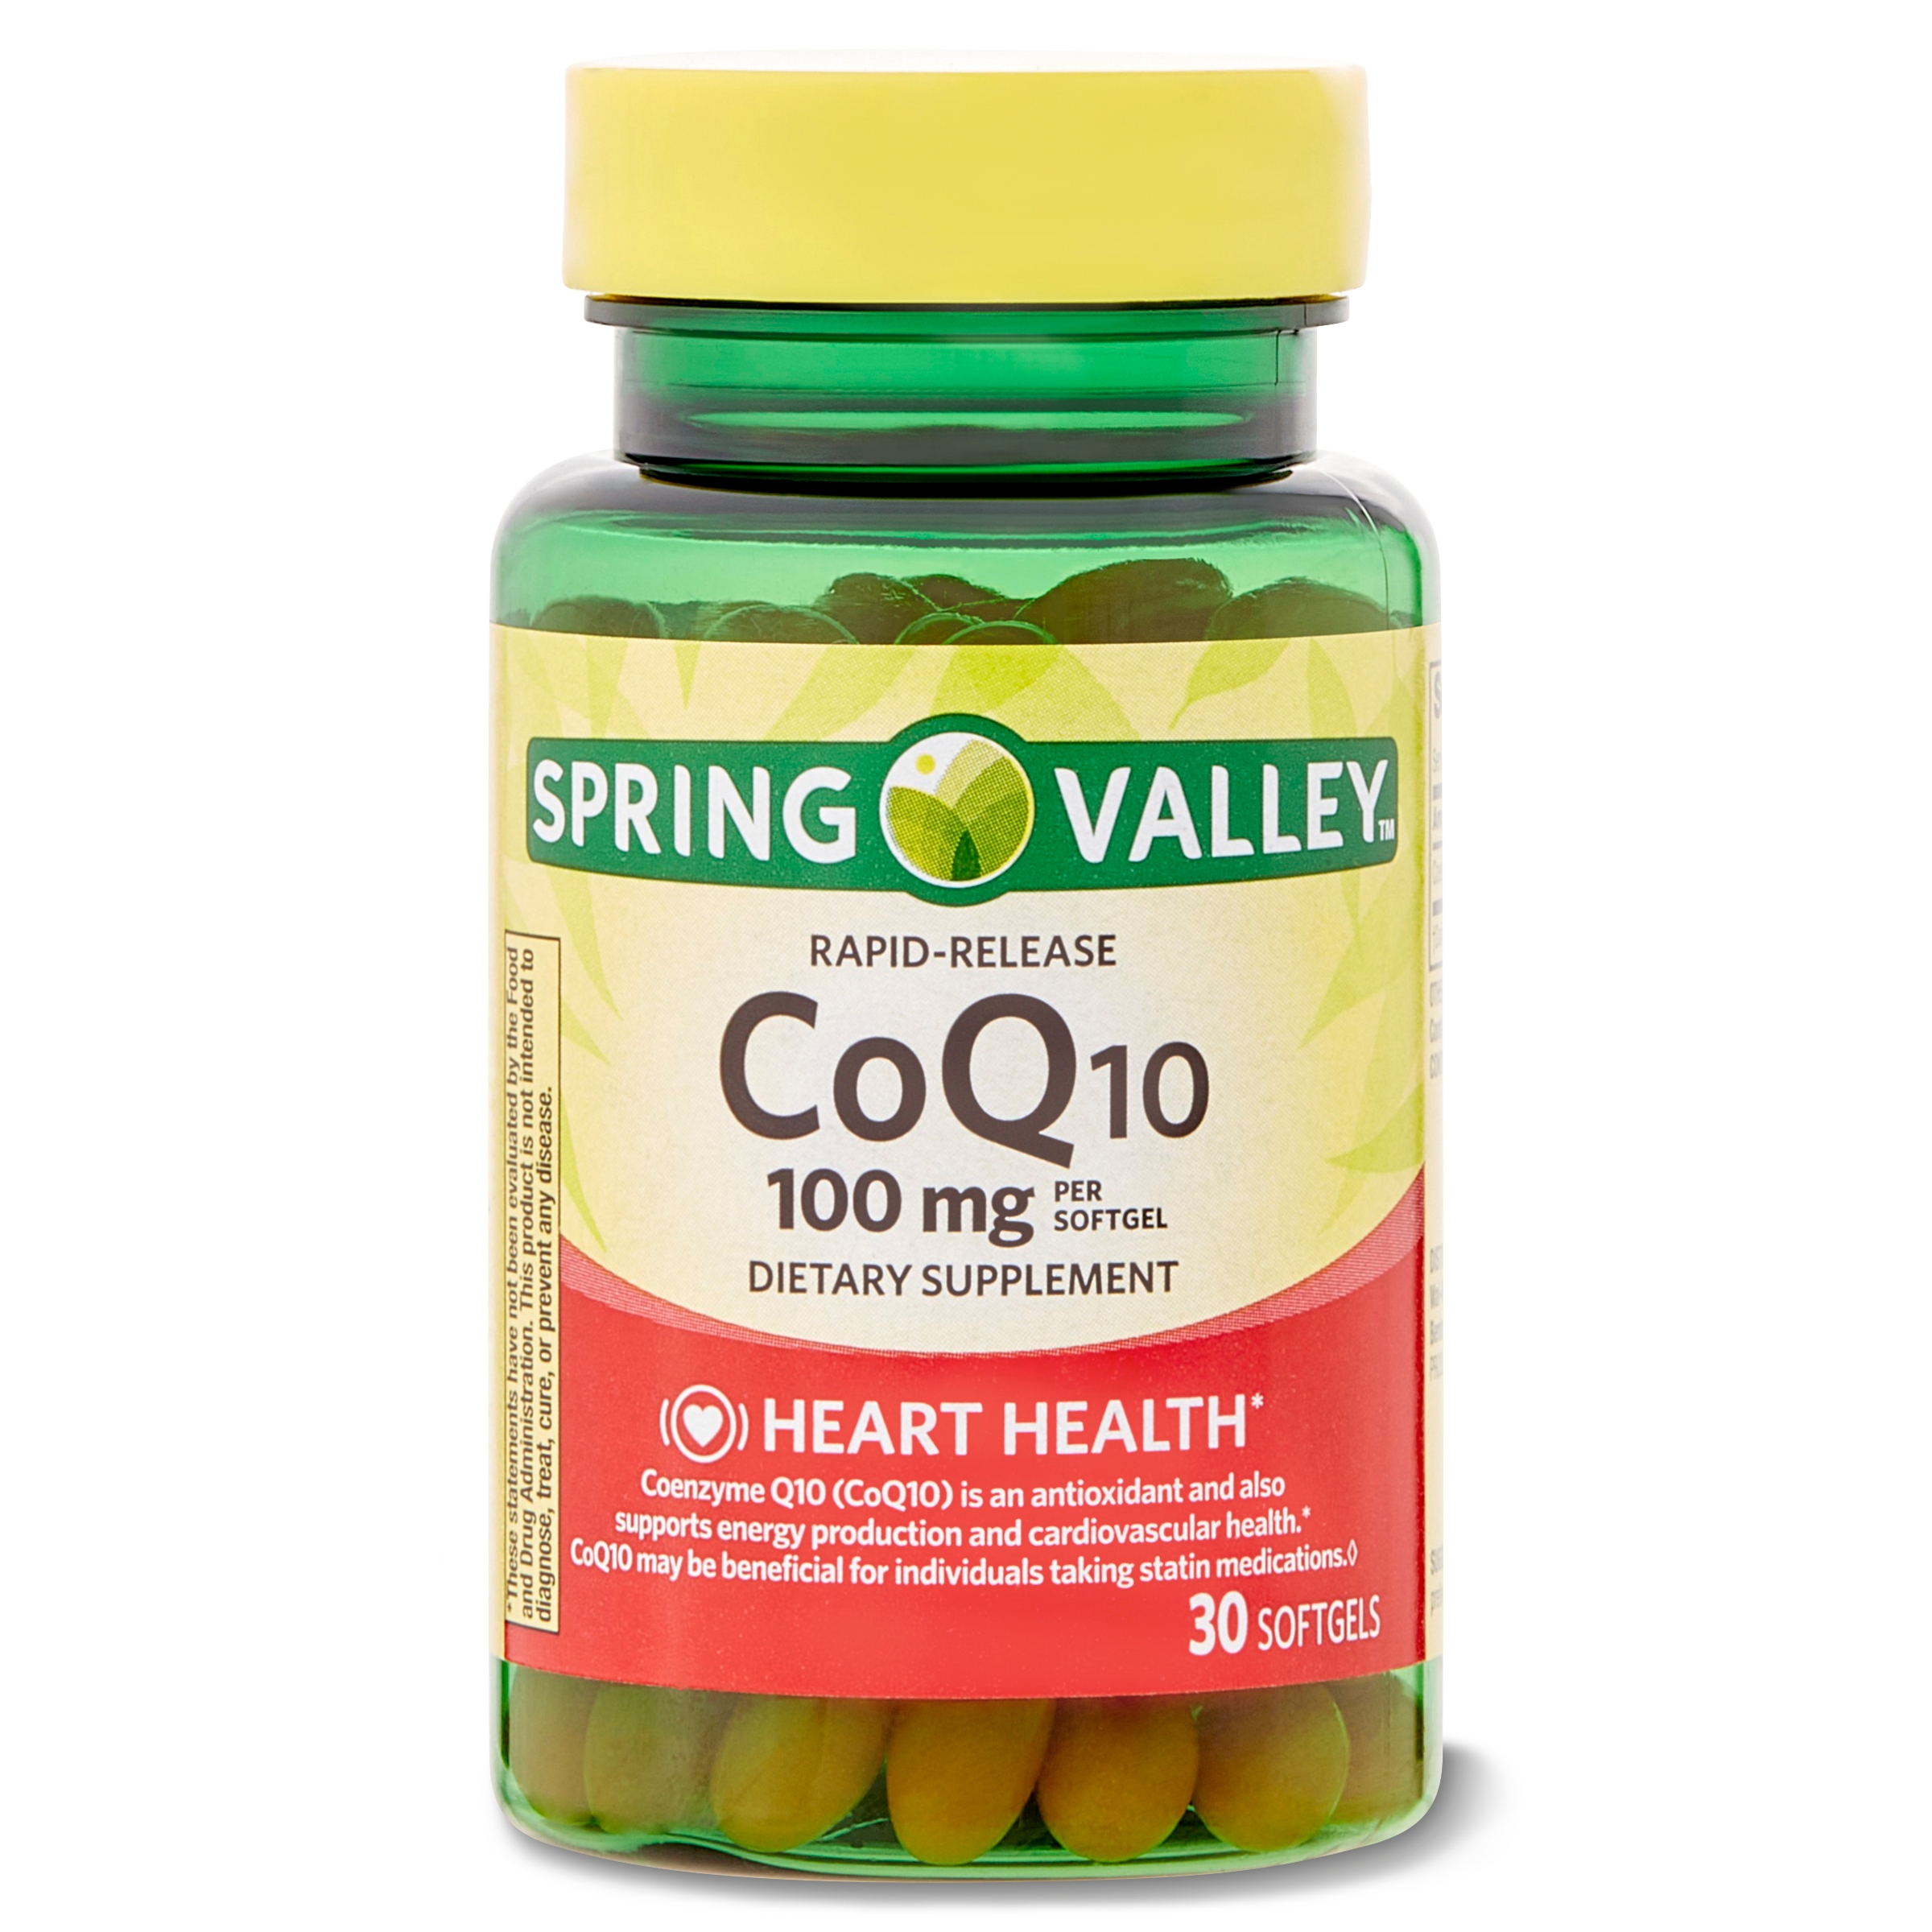 Spring Valley Rapid-Release CoQ10 Dietary Supplement, 100 mg, 30 Count - image 1 of 9